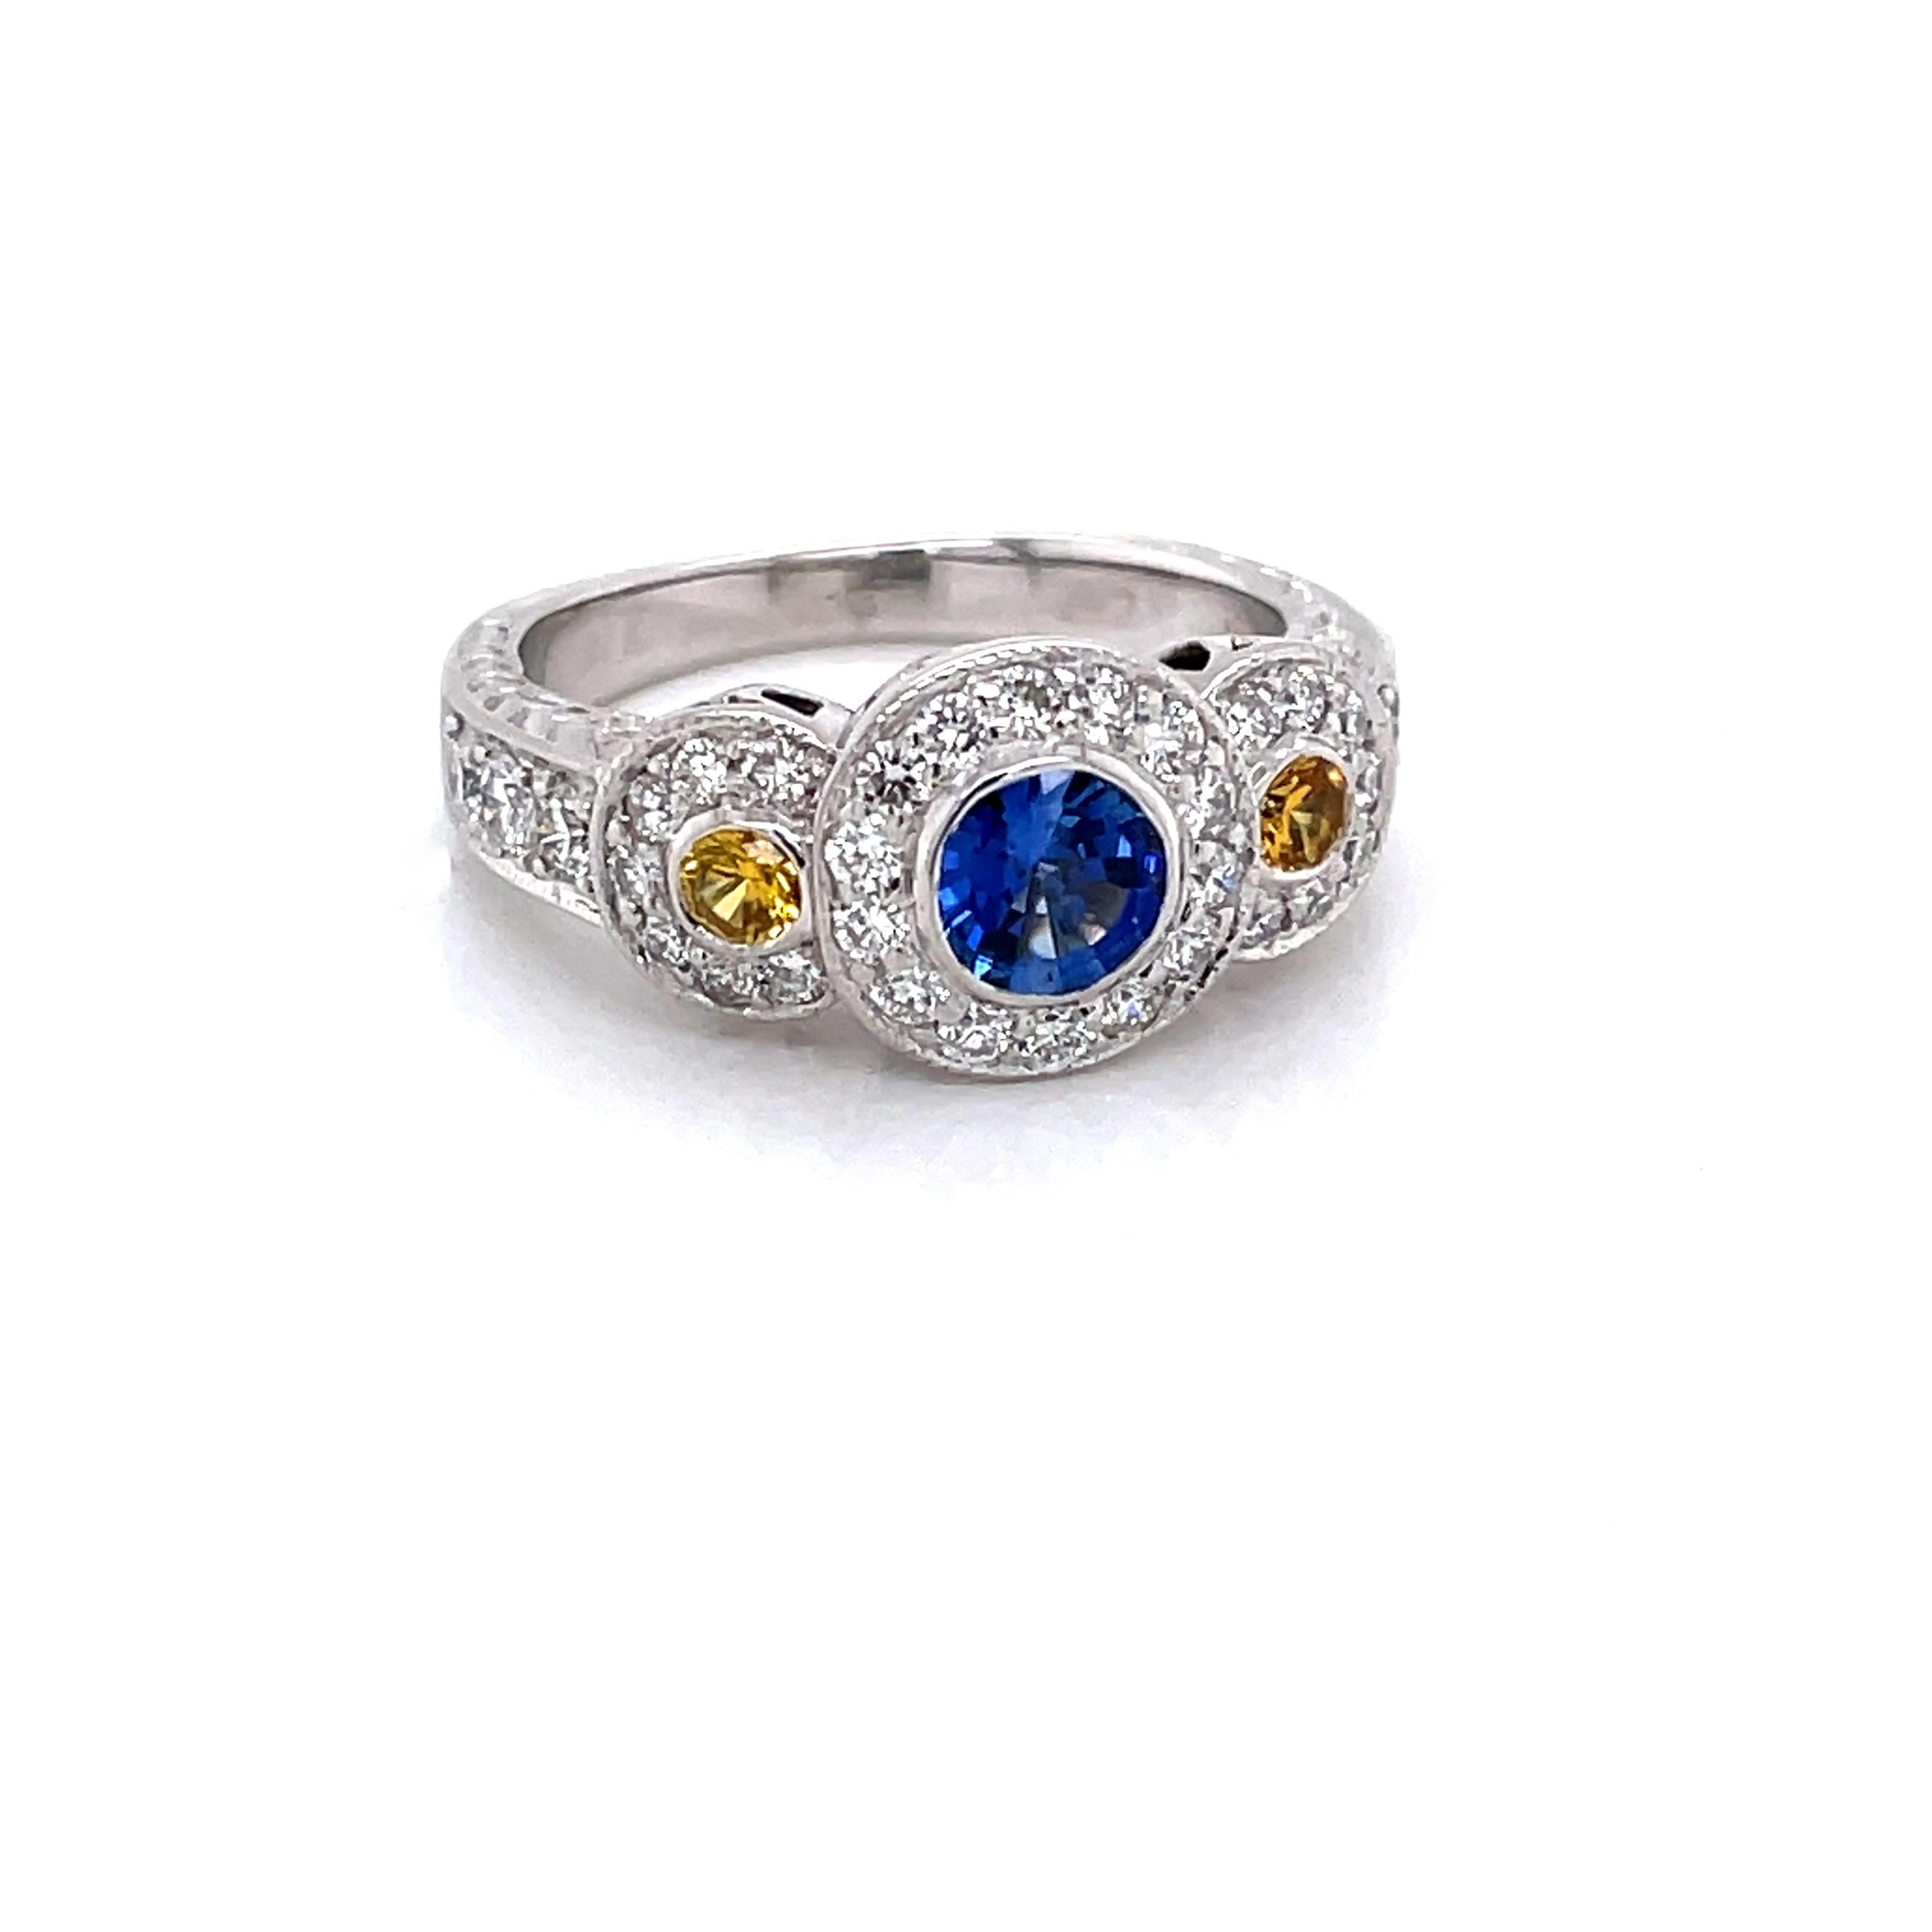 Vivid blue and yellow strongly saturated sapphires animate the beauty and sparkle of this triple halo diamond engagement ring in eighteen karat 18K white gold. One bezel set round faceted blue-violet .73 carat sapphire is featured at center and